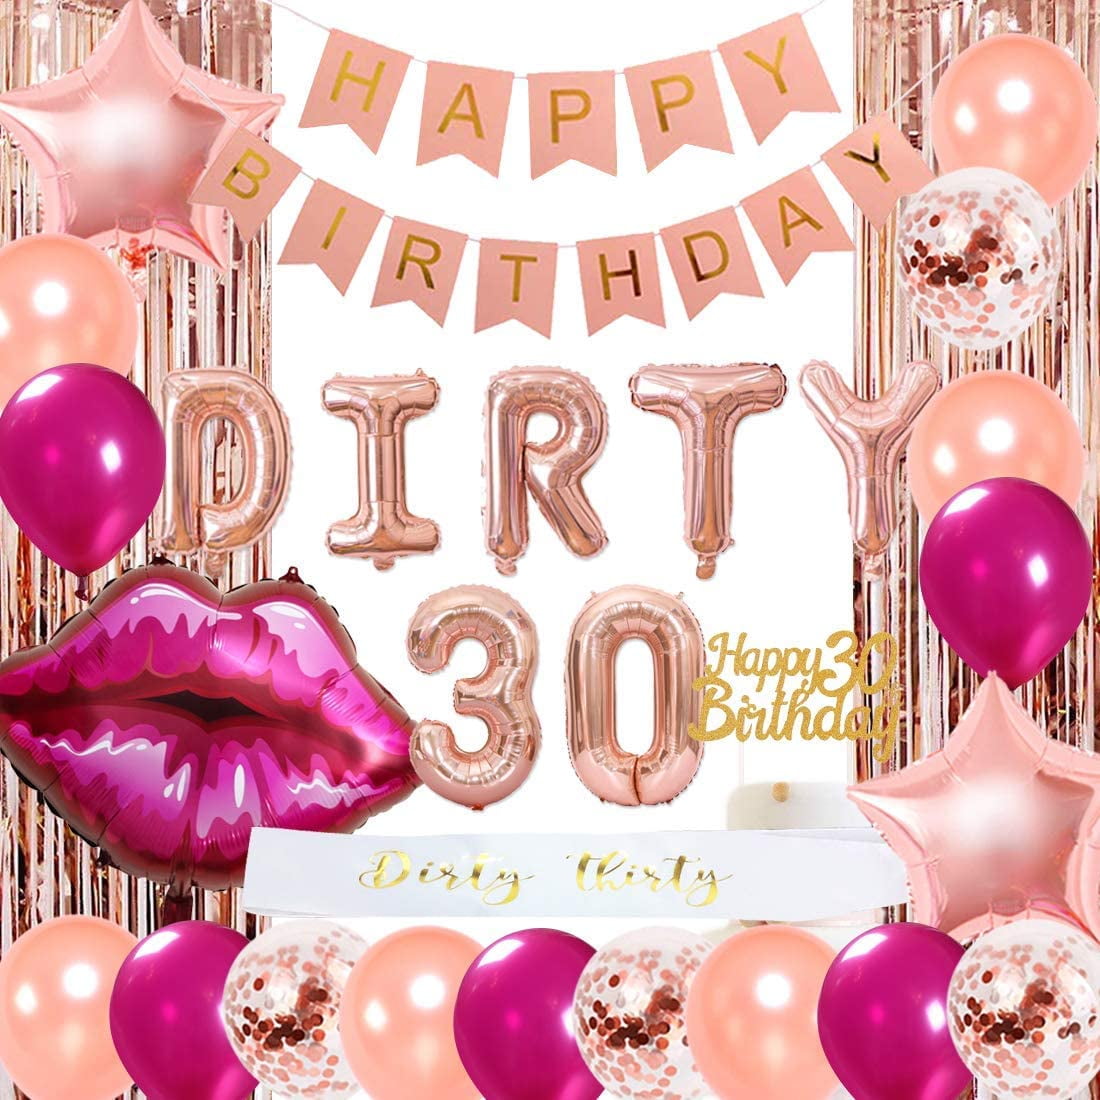 30th Birthday Decorations For Women Rose Gold Happy 30th Birthday For Her 30 Party Supplies Dirty 30 Balloons Sash Cake Topper Walmart Com Walmart Com